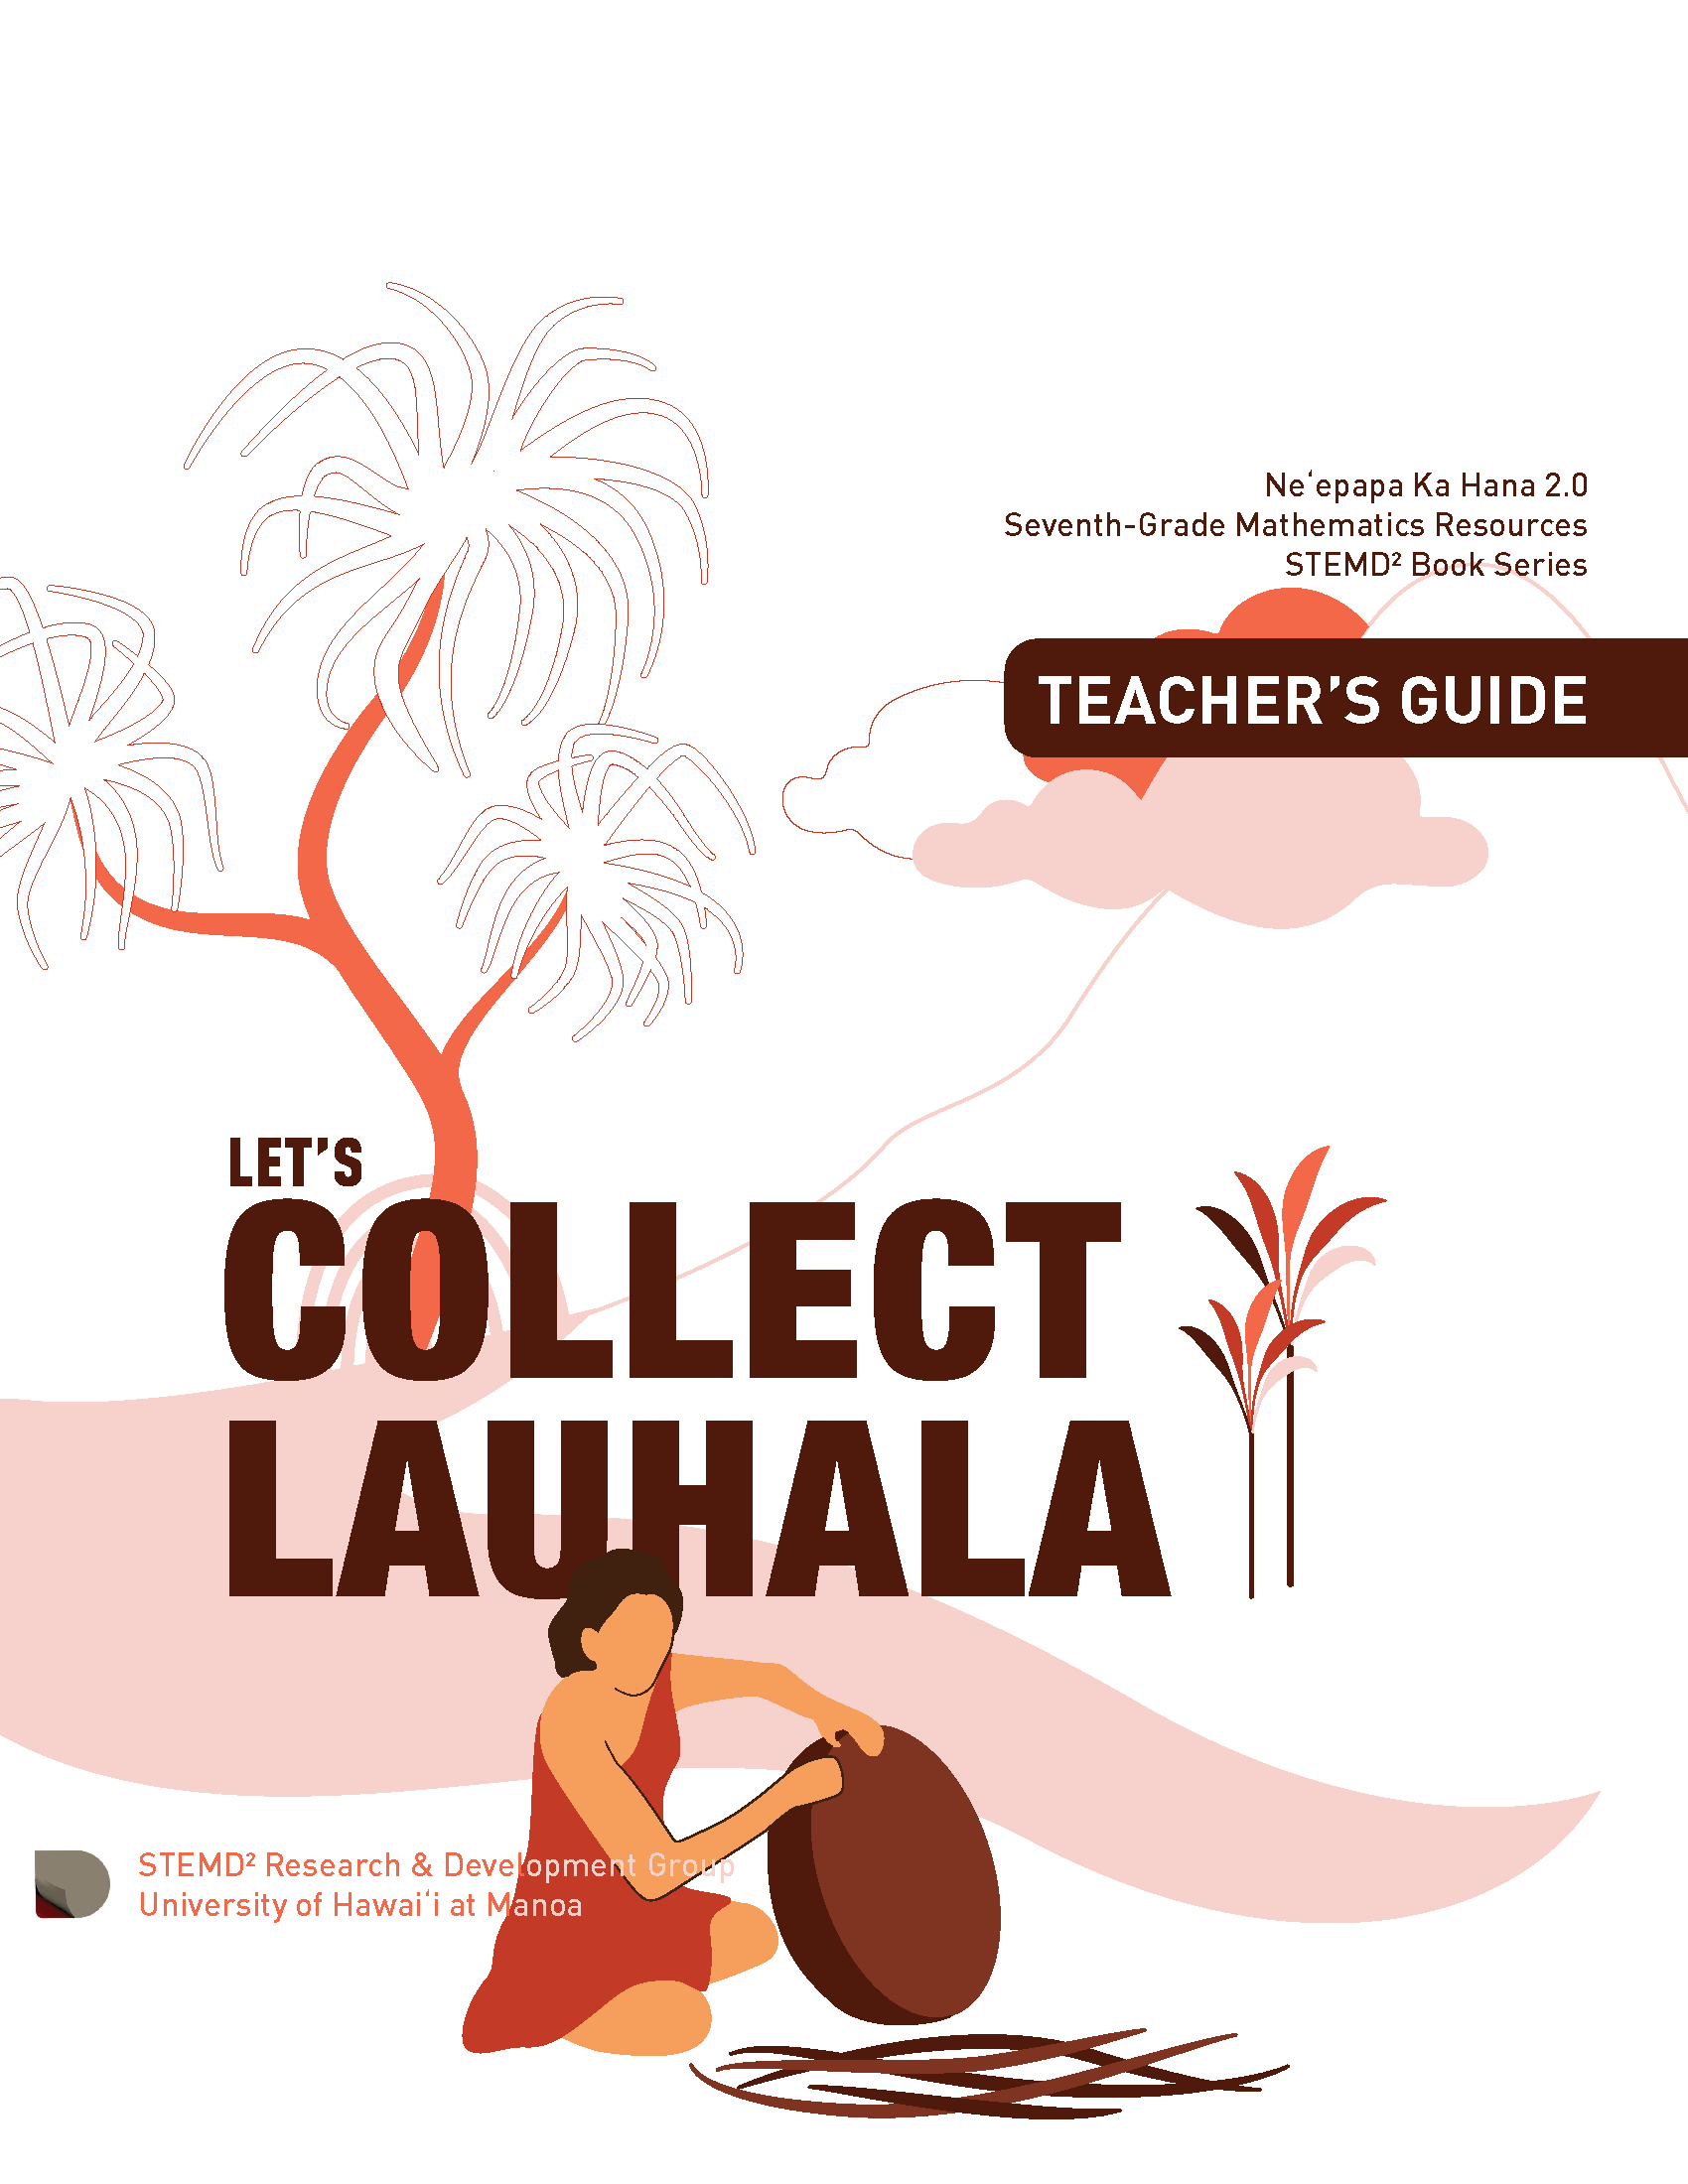 Cover of the let's collect lauhala teacher book